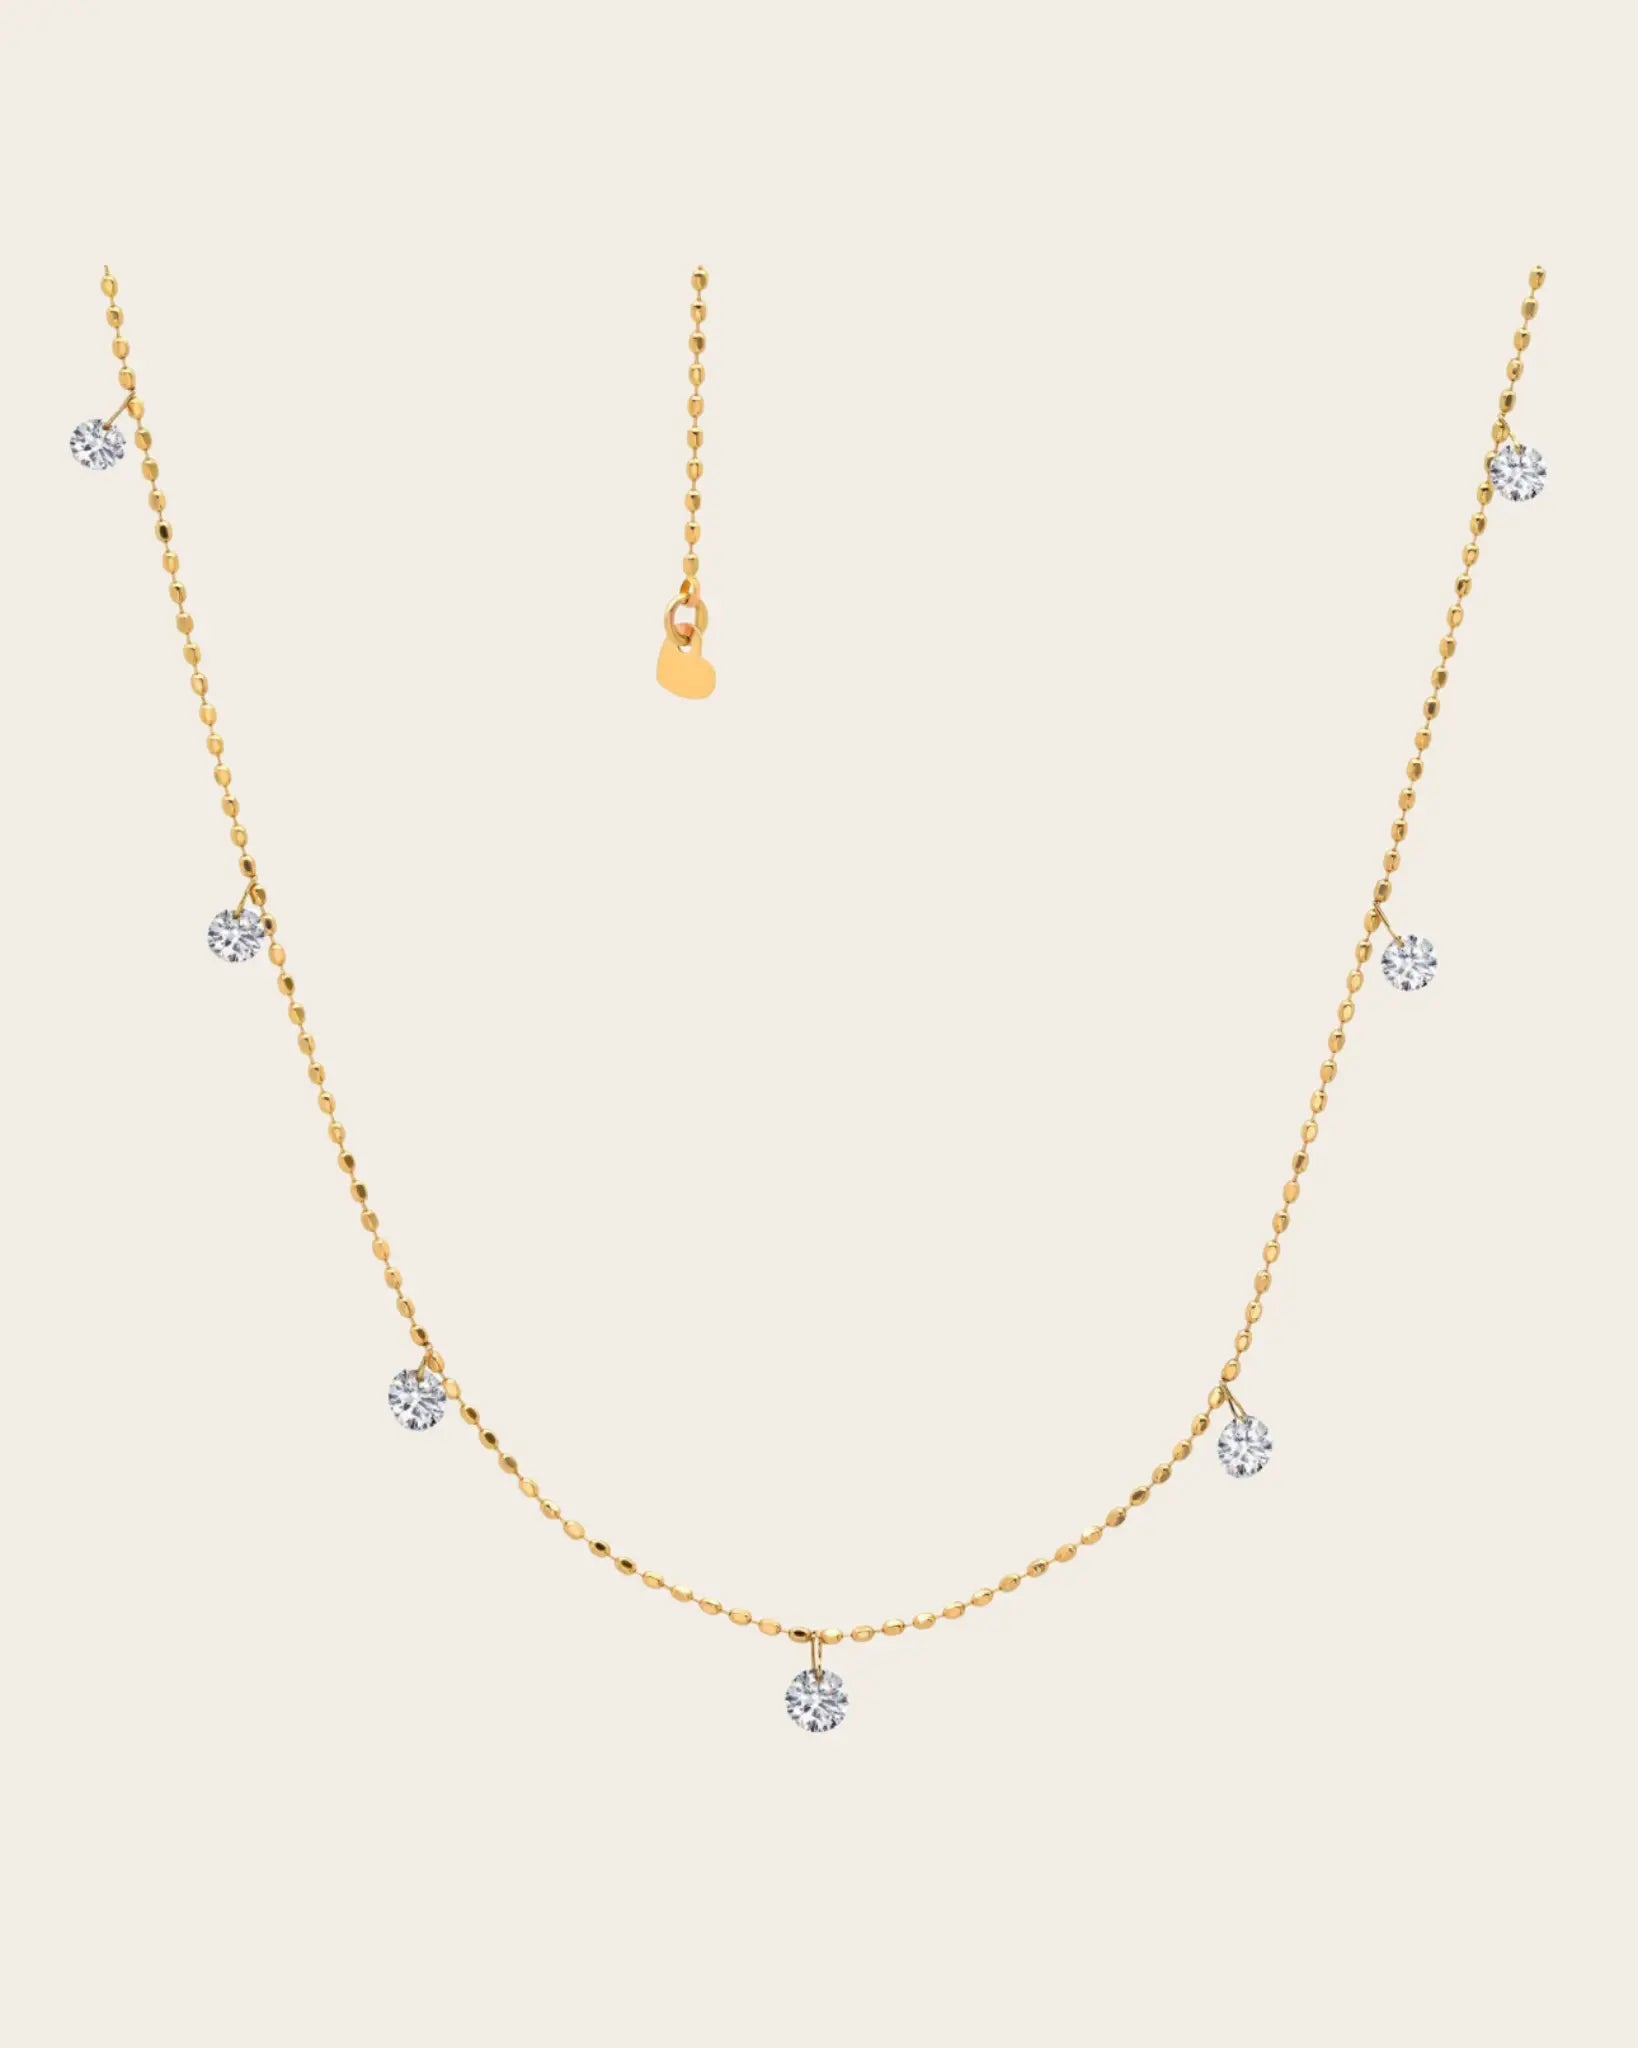 Small Floating Diamond Necklace Small Floating Diamond Necklace Graziela Gems Graziela Gems Yellow-Gold Squash Blossom Vail